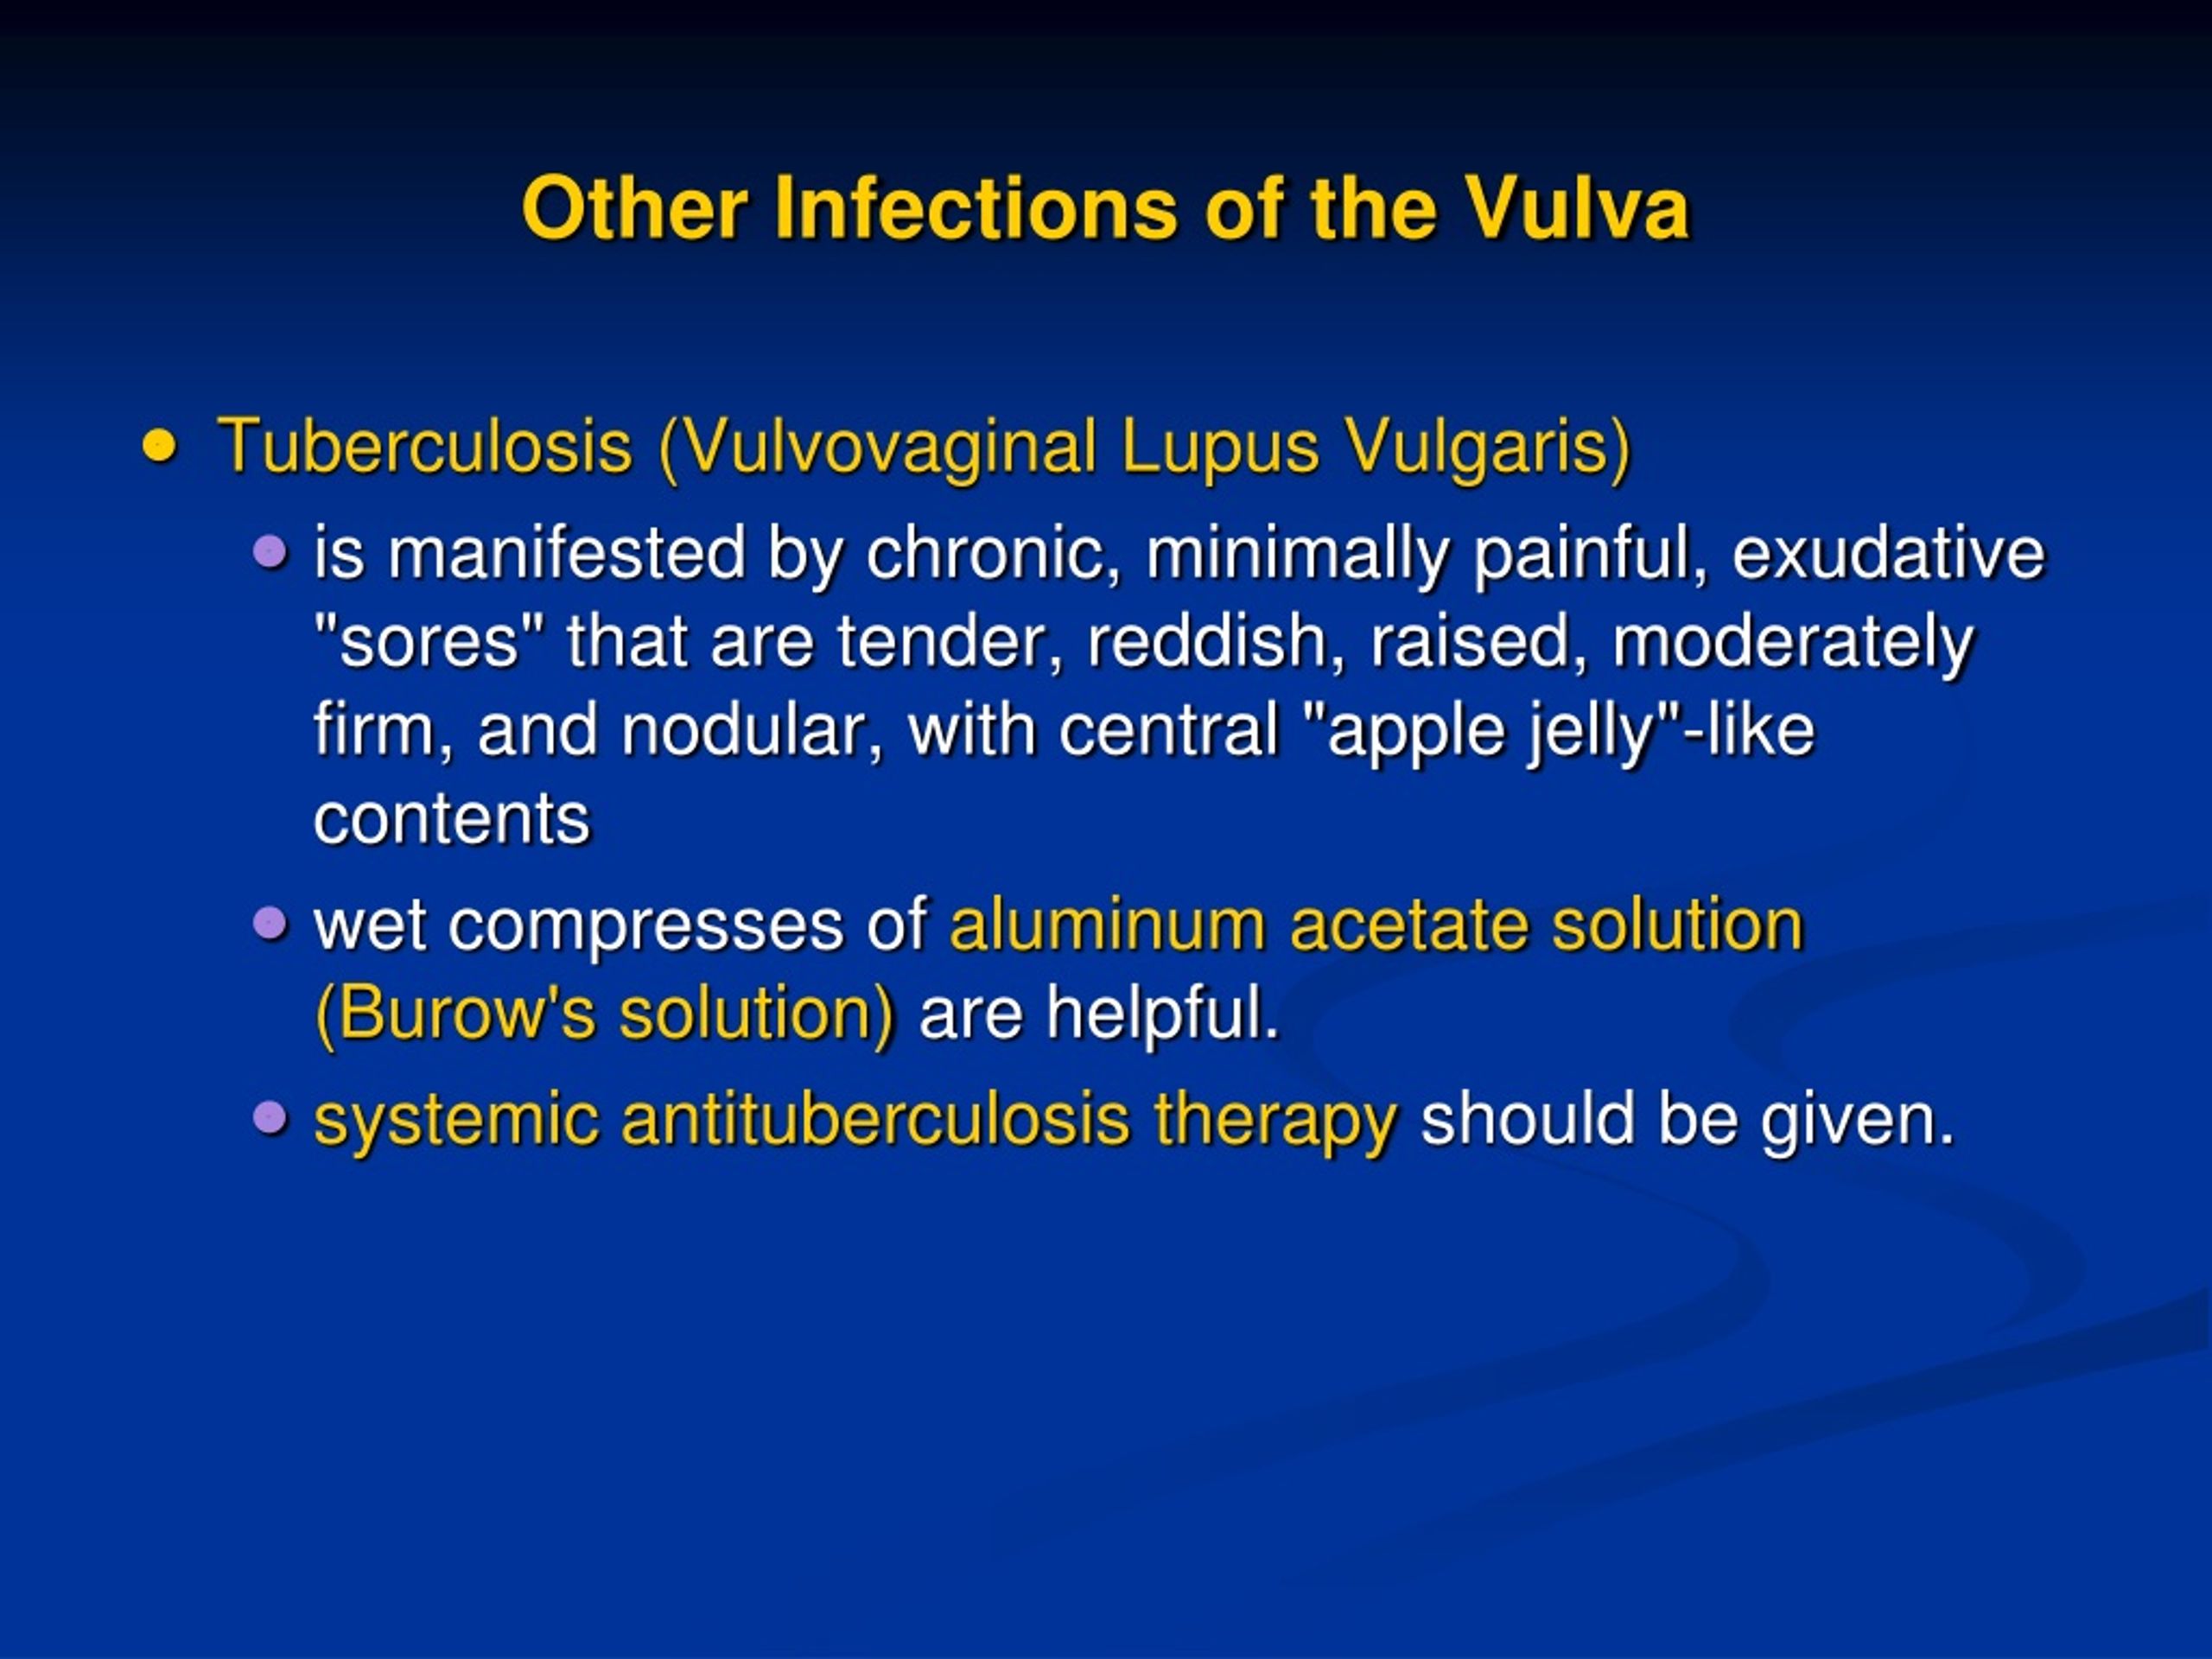 Ppt Benign Disorders Of The Vulva Powerpoint Presentation Free Download Id9242206 1484